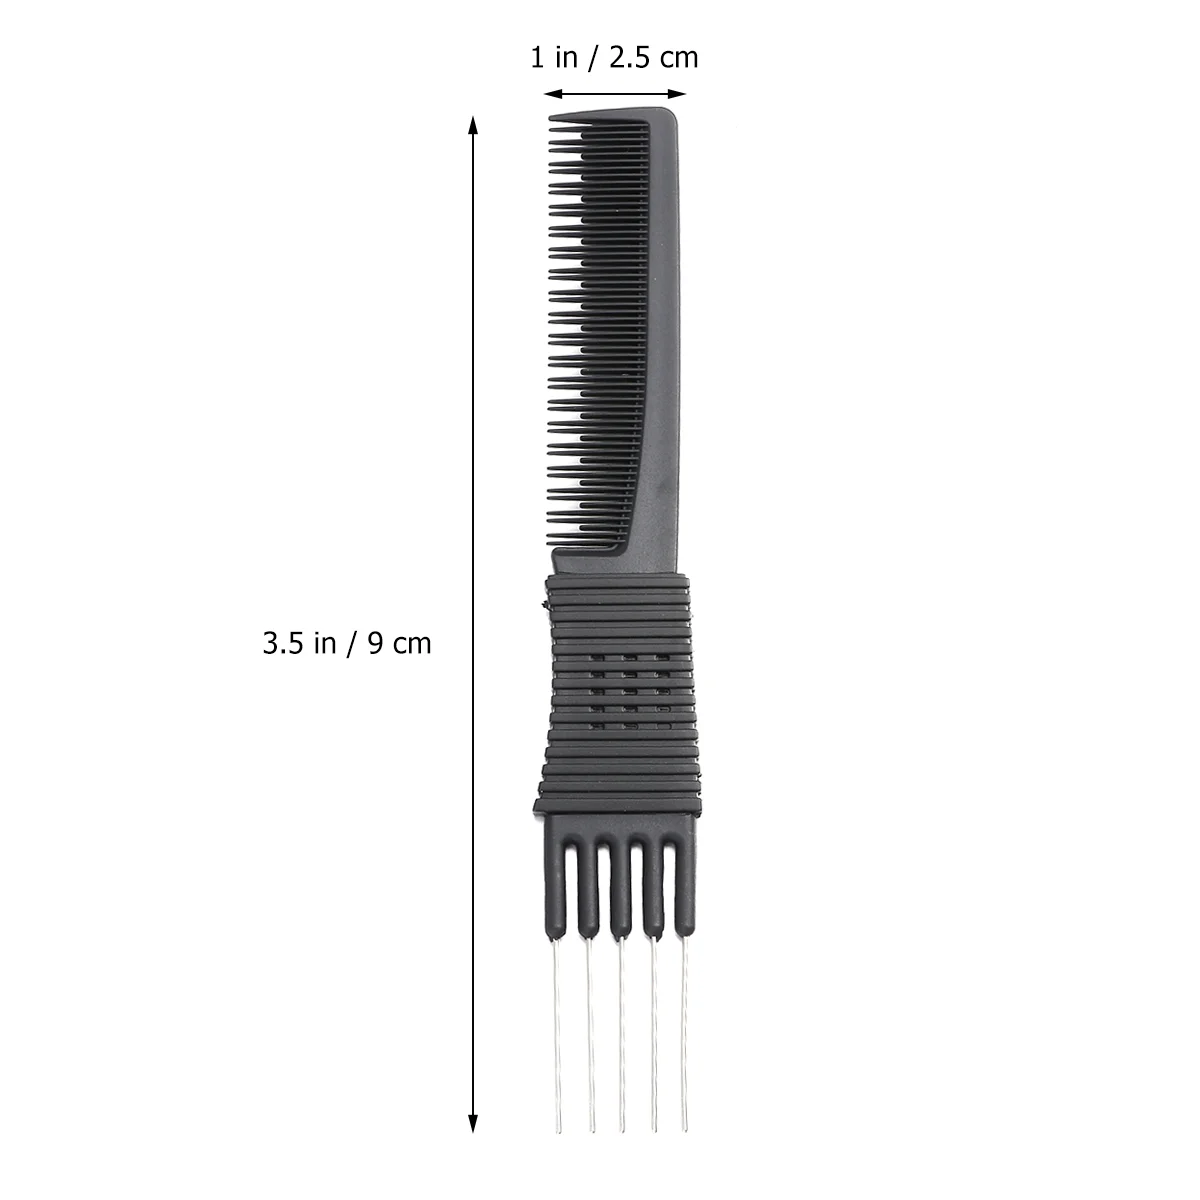 

Comb Hair Combs Teasing Styling Metal Salon Prong Haircut Lift Carbon Black Static Anti Tooth Tools Professional Tail Tapering